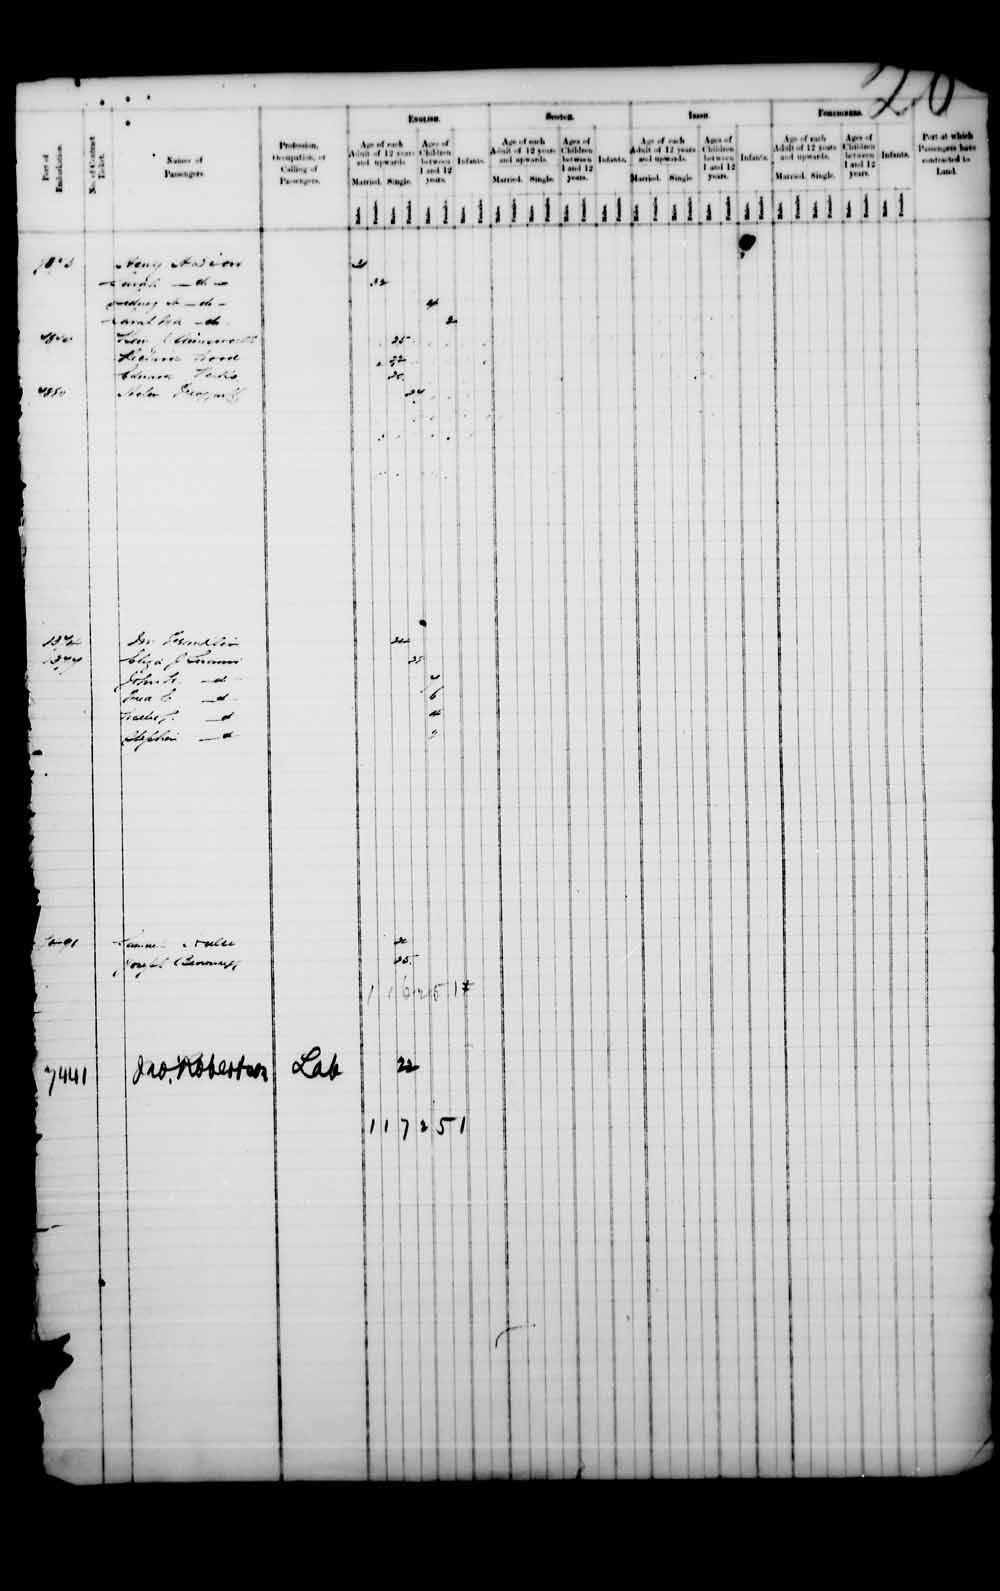 Digitized page of Passenger Lists for Image No.: e003541621